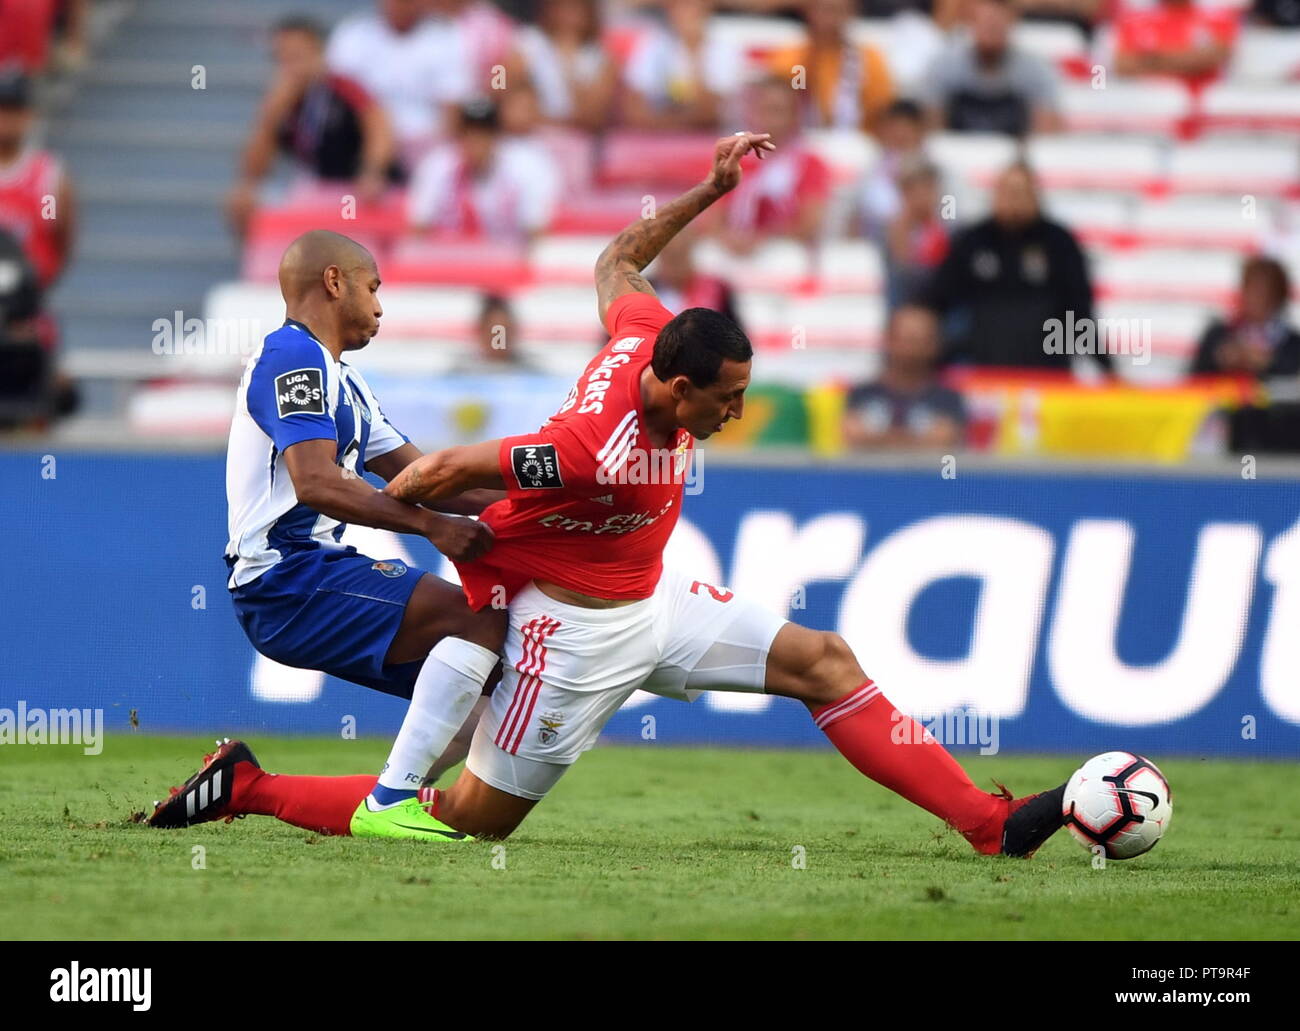 (181008) -- LISBON, Oct. 8, 2018 (Xinhua) -- Cristian Lema (R) of Benfica vies with Yacine Brahimi of Porto during the Portuguese League soccer match between SL Benfica and FC Porto at Luz Stadium in Lisbon, Portugal, Oct. 7, 2018. Benfica won 1-0. (Xinhua/Zhang Liyun) Stock Photo